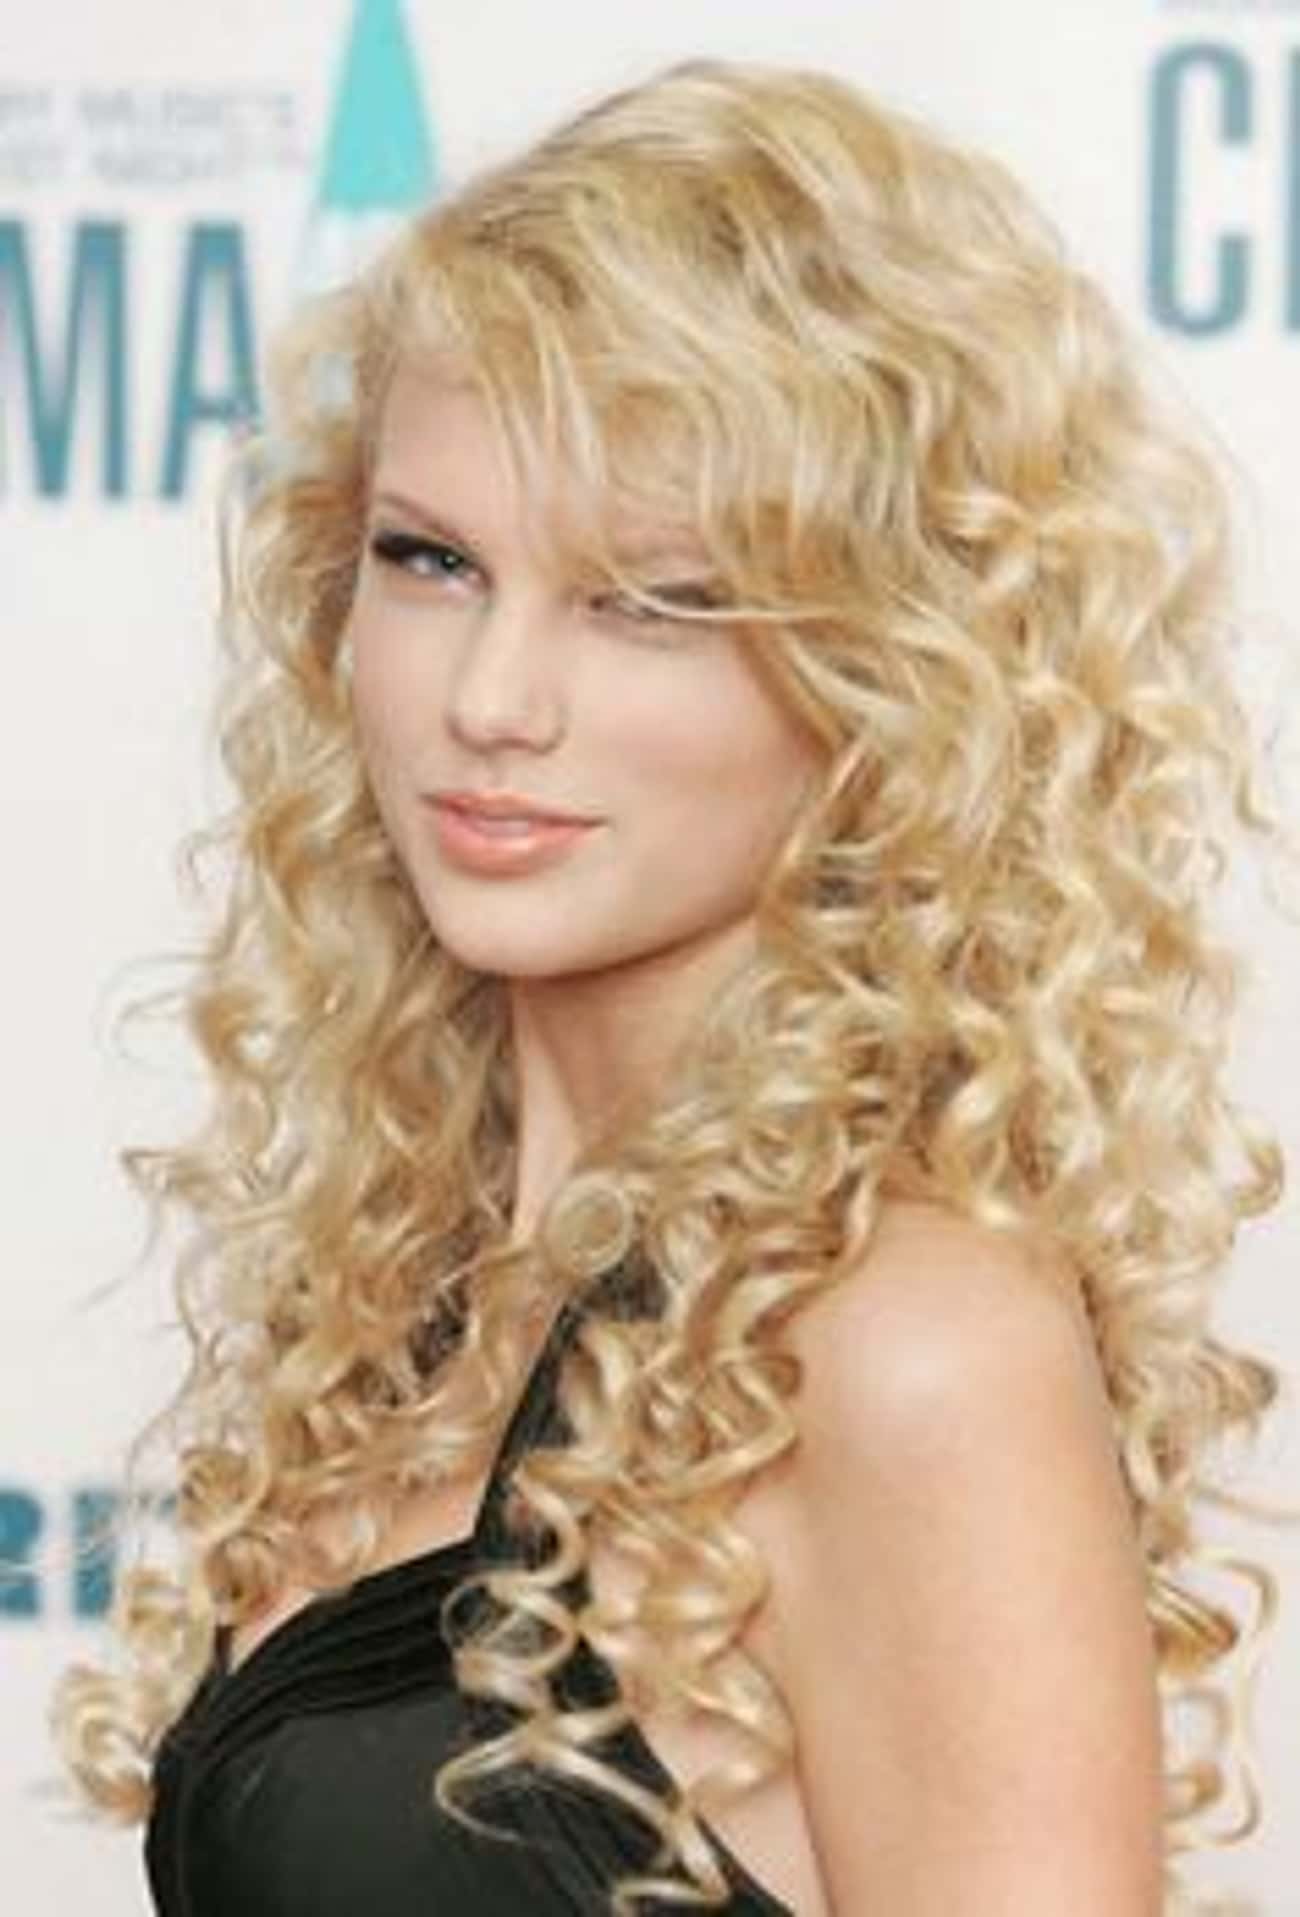 Young Taylor Swift in a Black Dress at an Awards Show